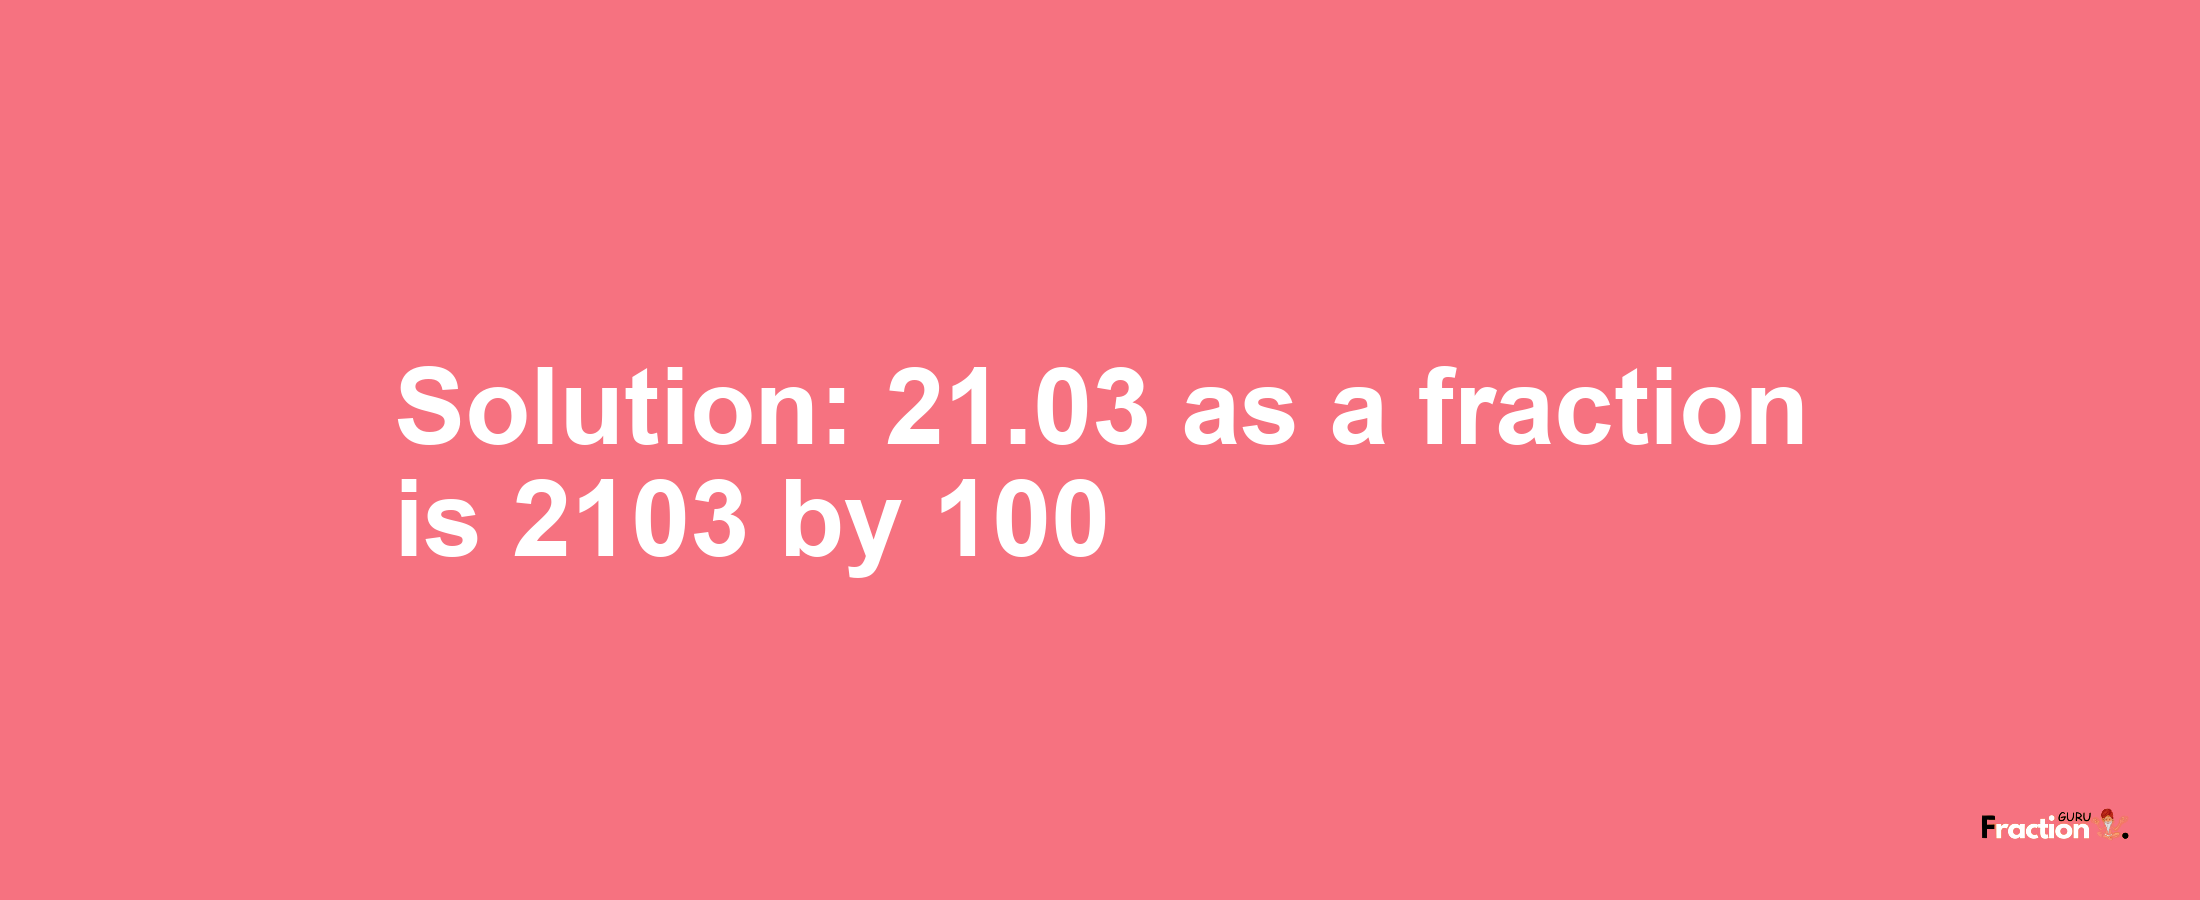 Solution:21.03 as a fraction is 2103/100